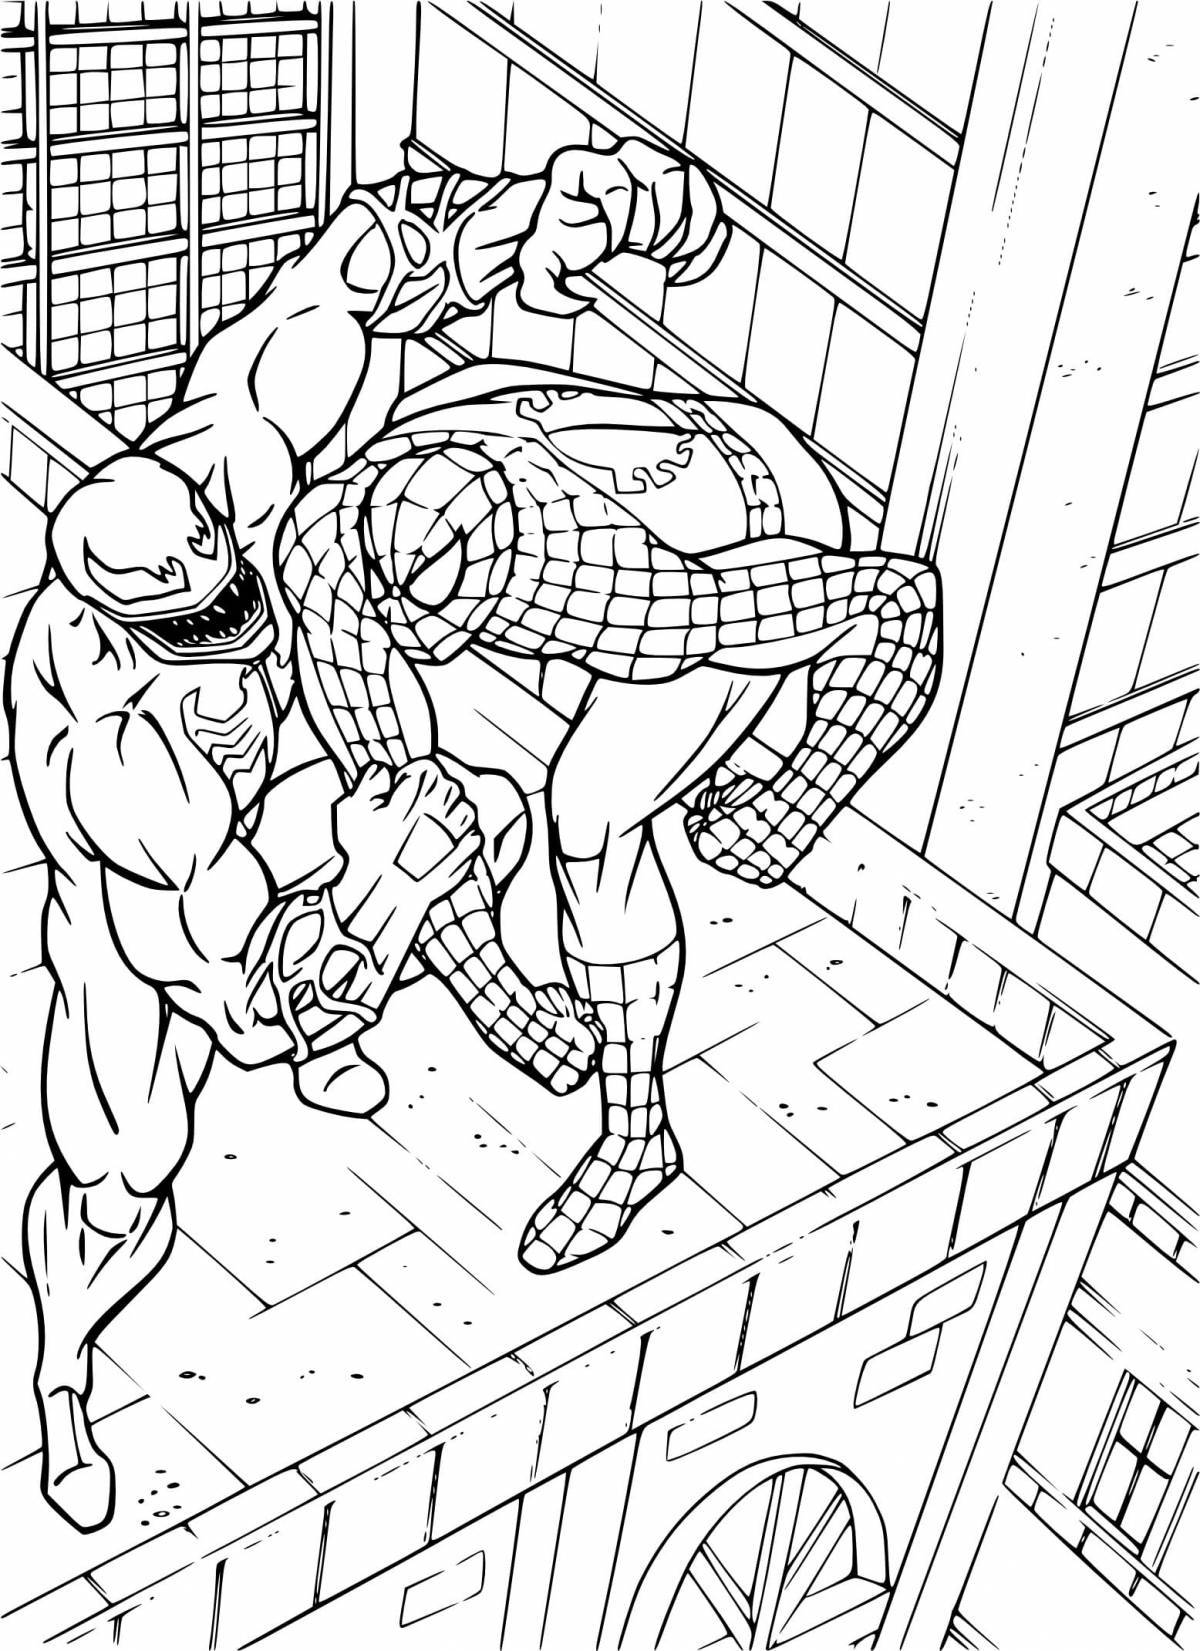 Spiderman's brightly colored coloring page